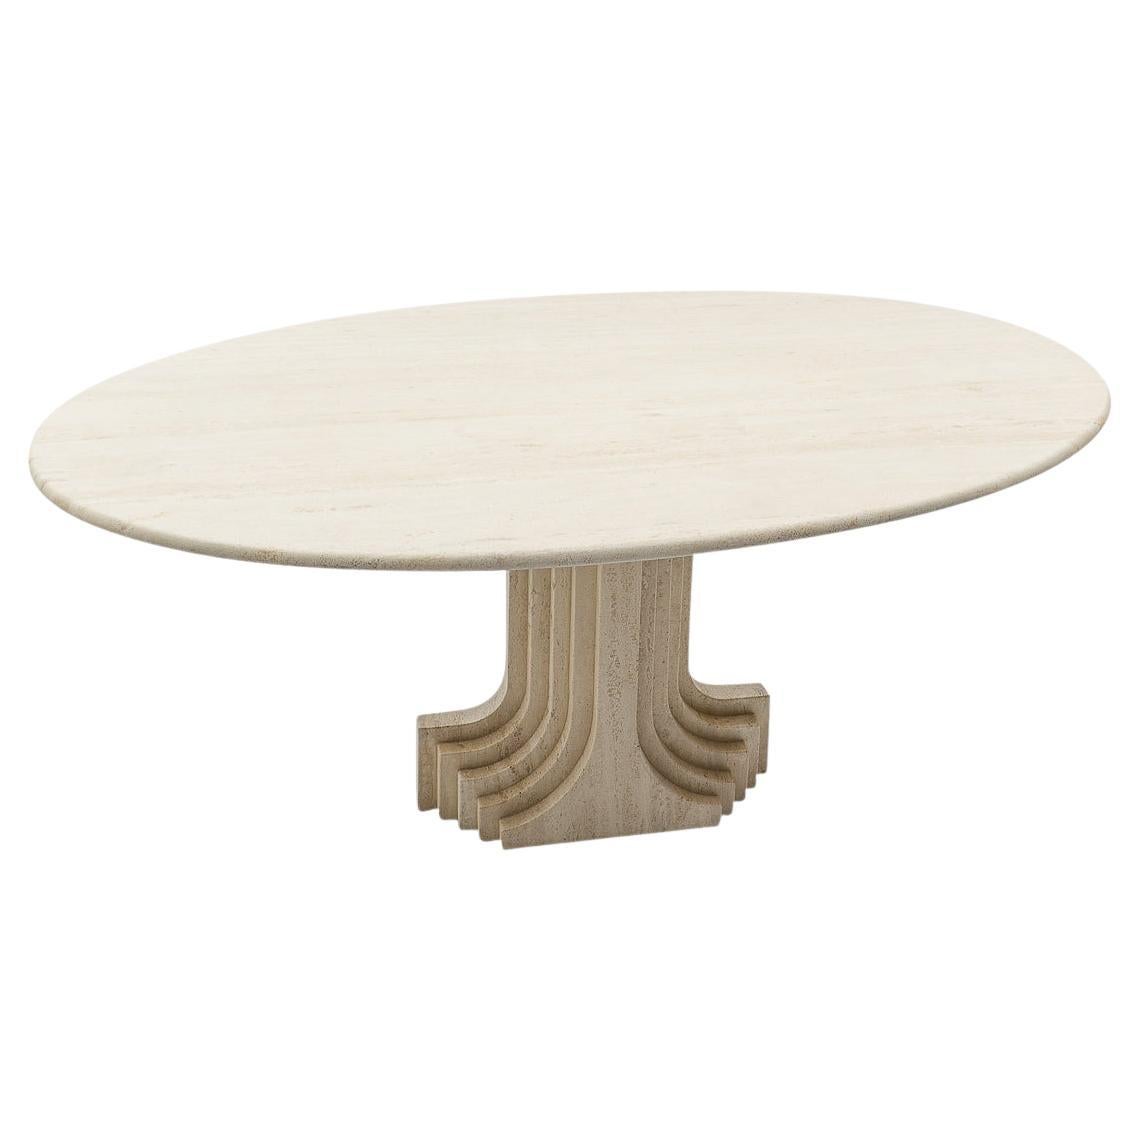 Sculptural Carlo Scarpa Travertine Dining Table, by Cattelan Italia, 1970s